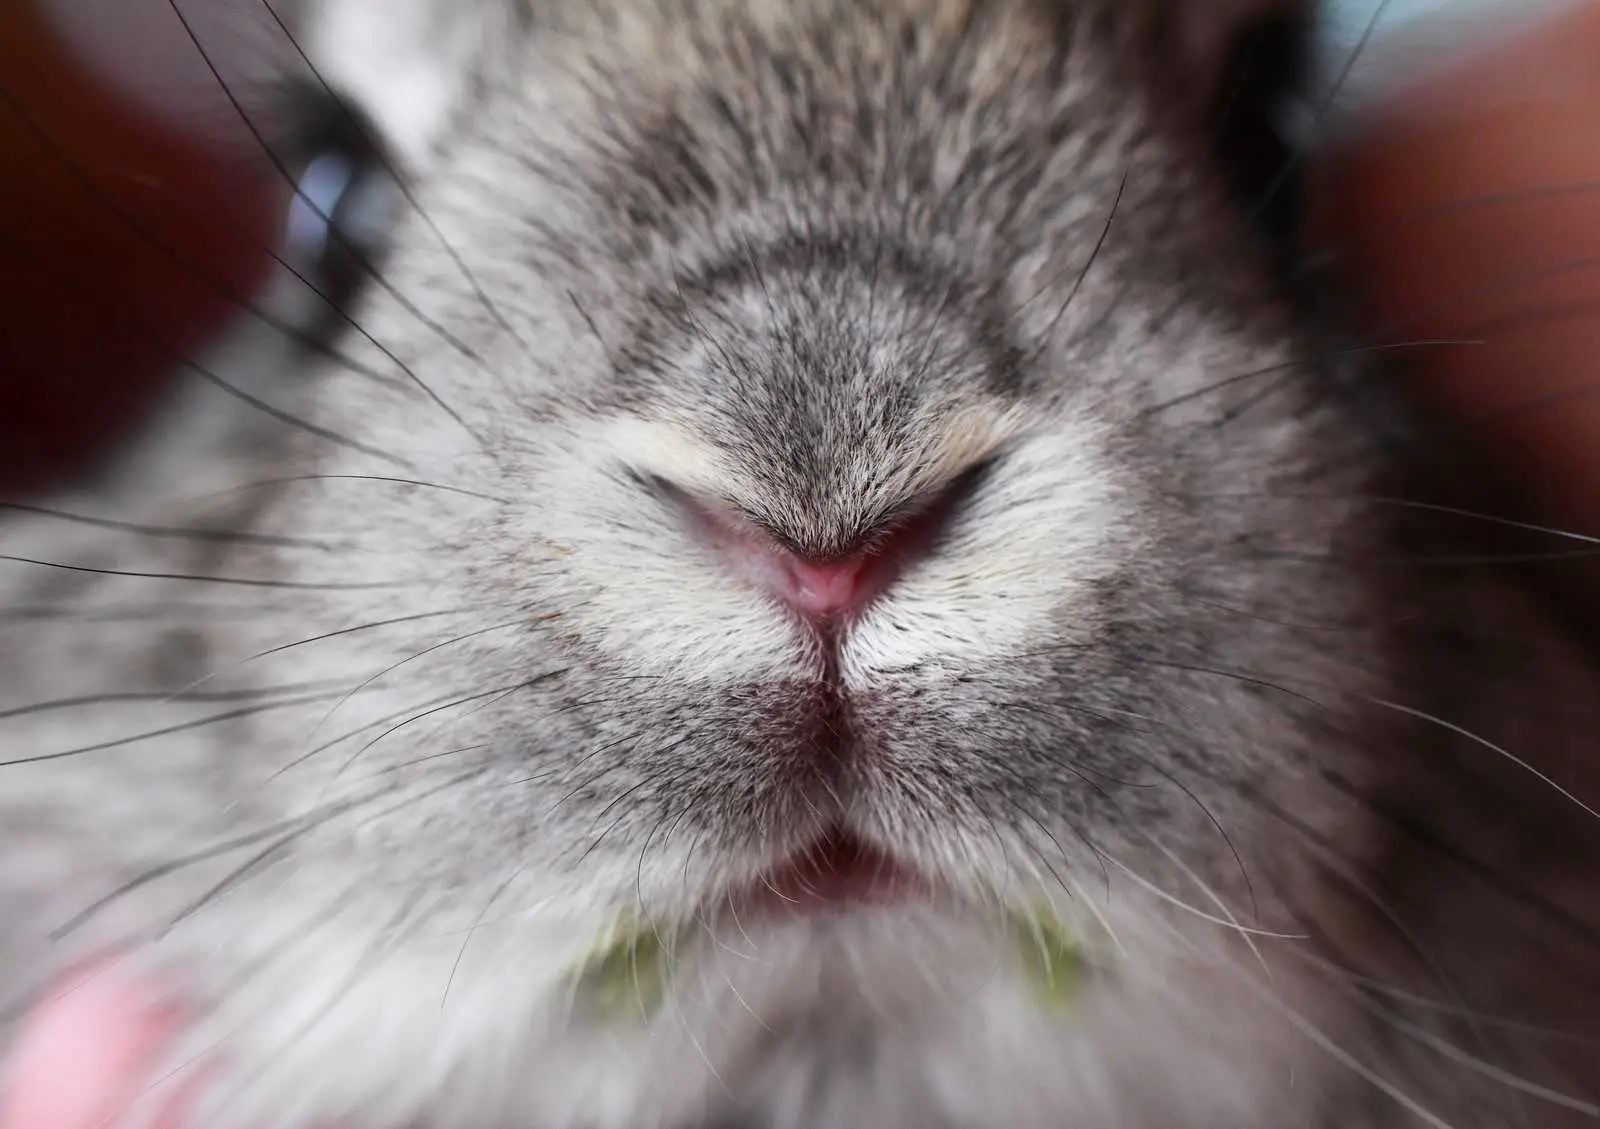 Why do rabbits noses twitch?